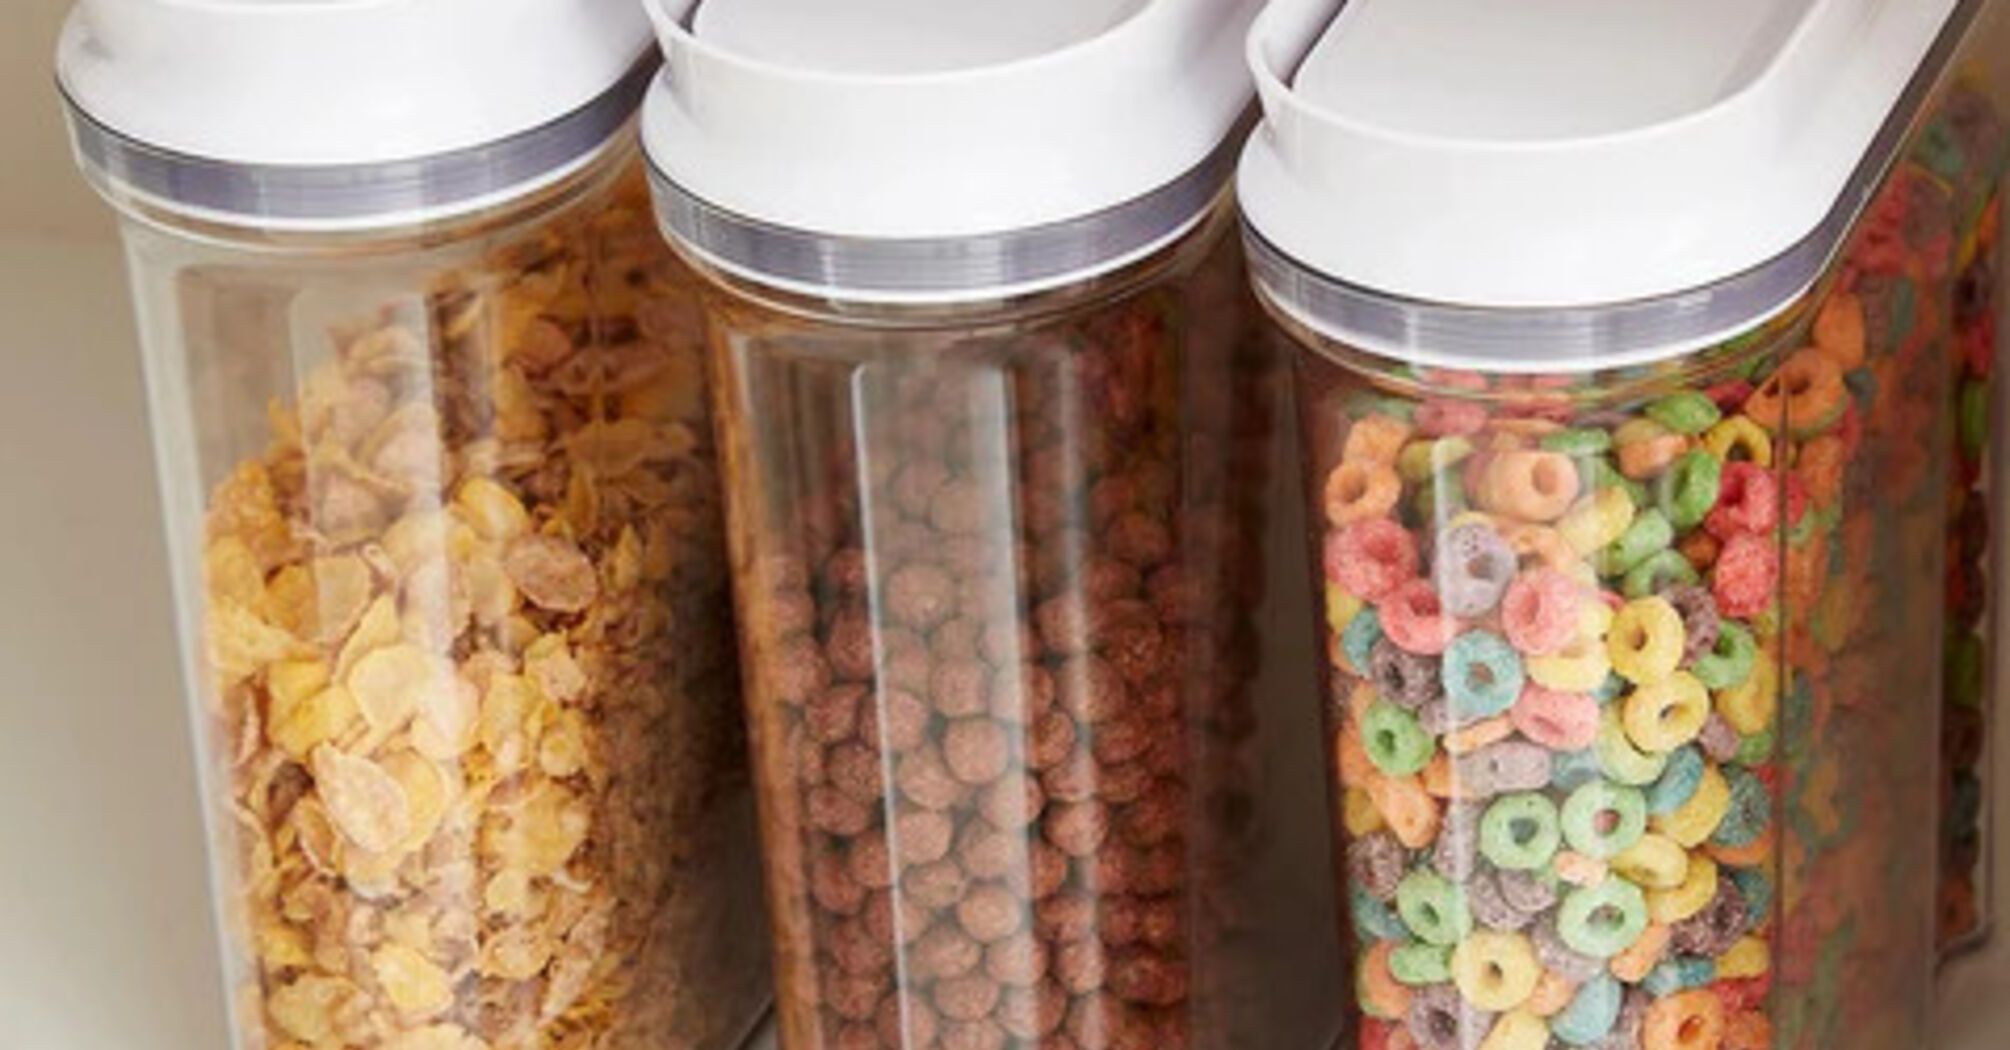 How to store cereals properly to keep them for a long time